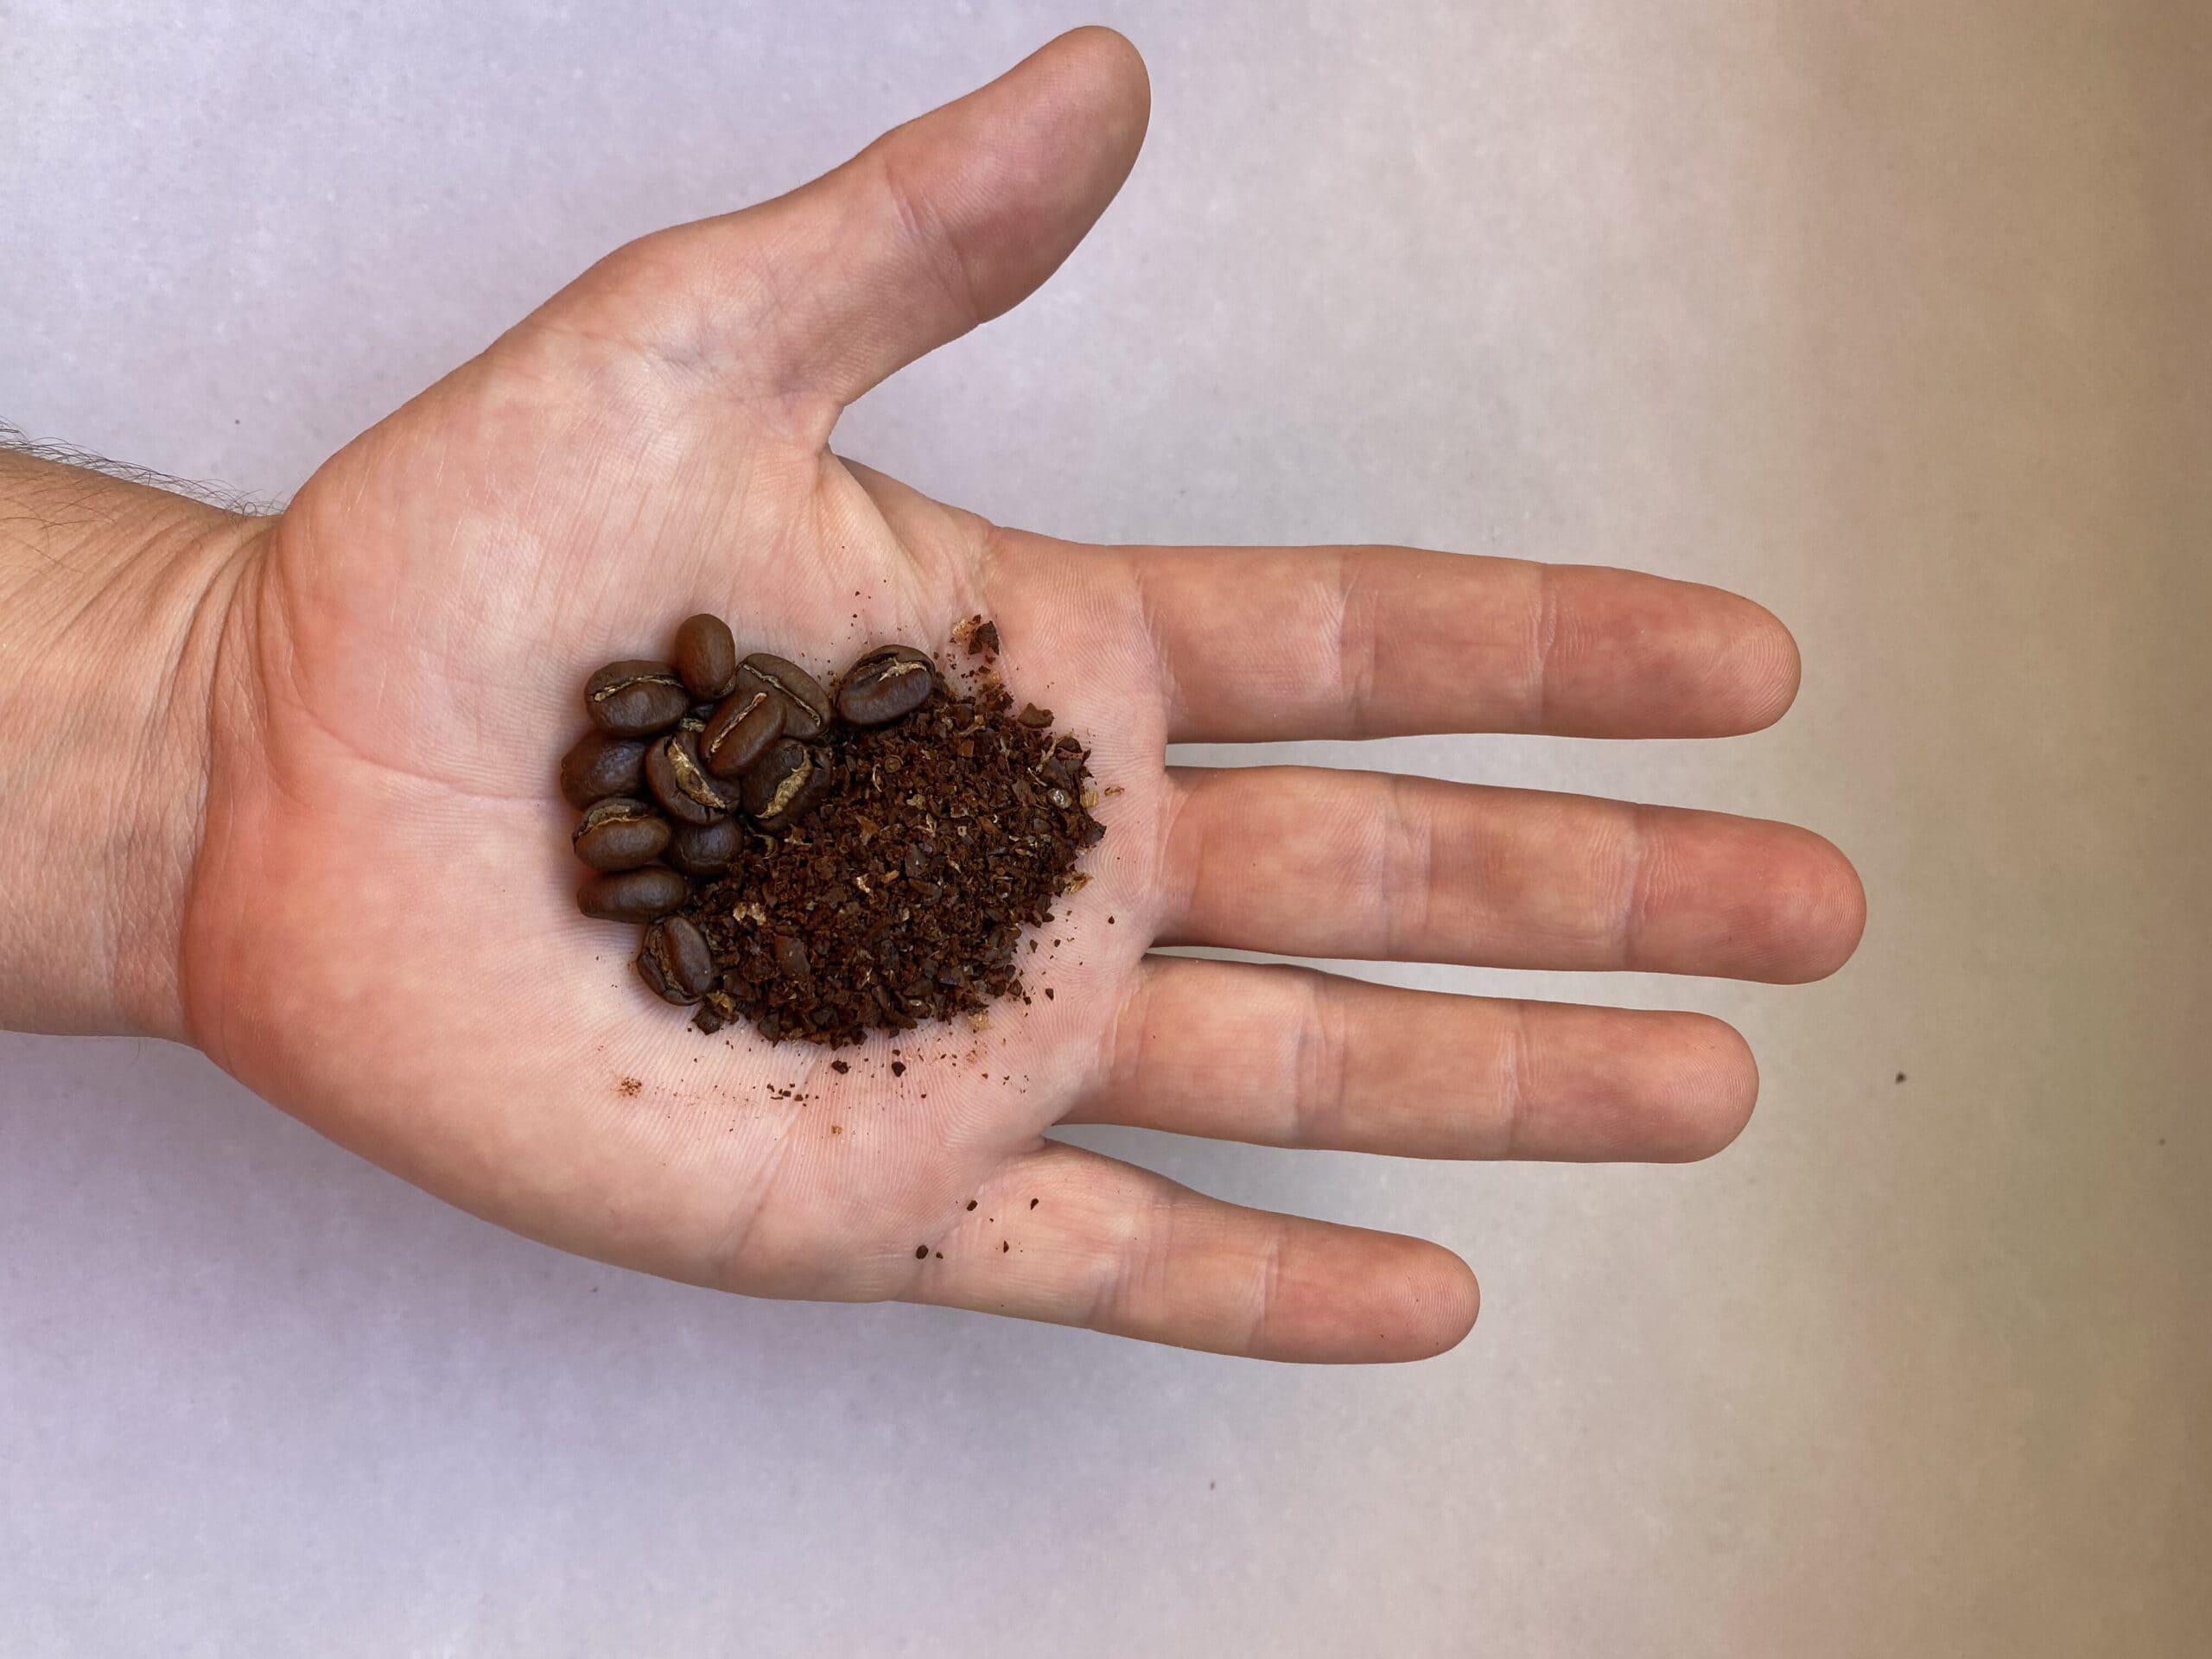 grind coffee beans lies on the hand